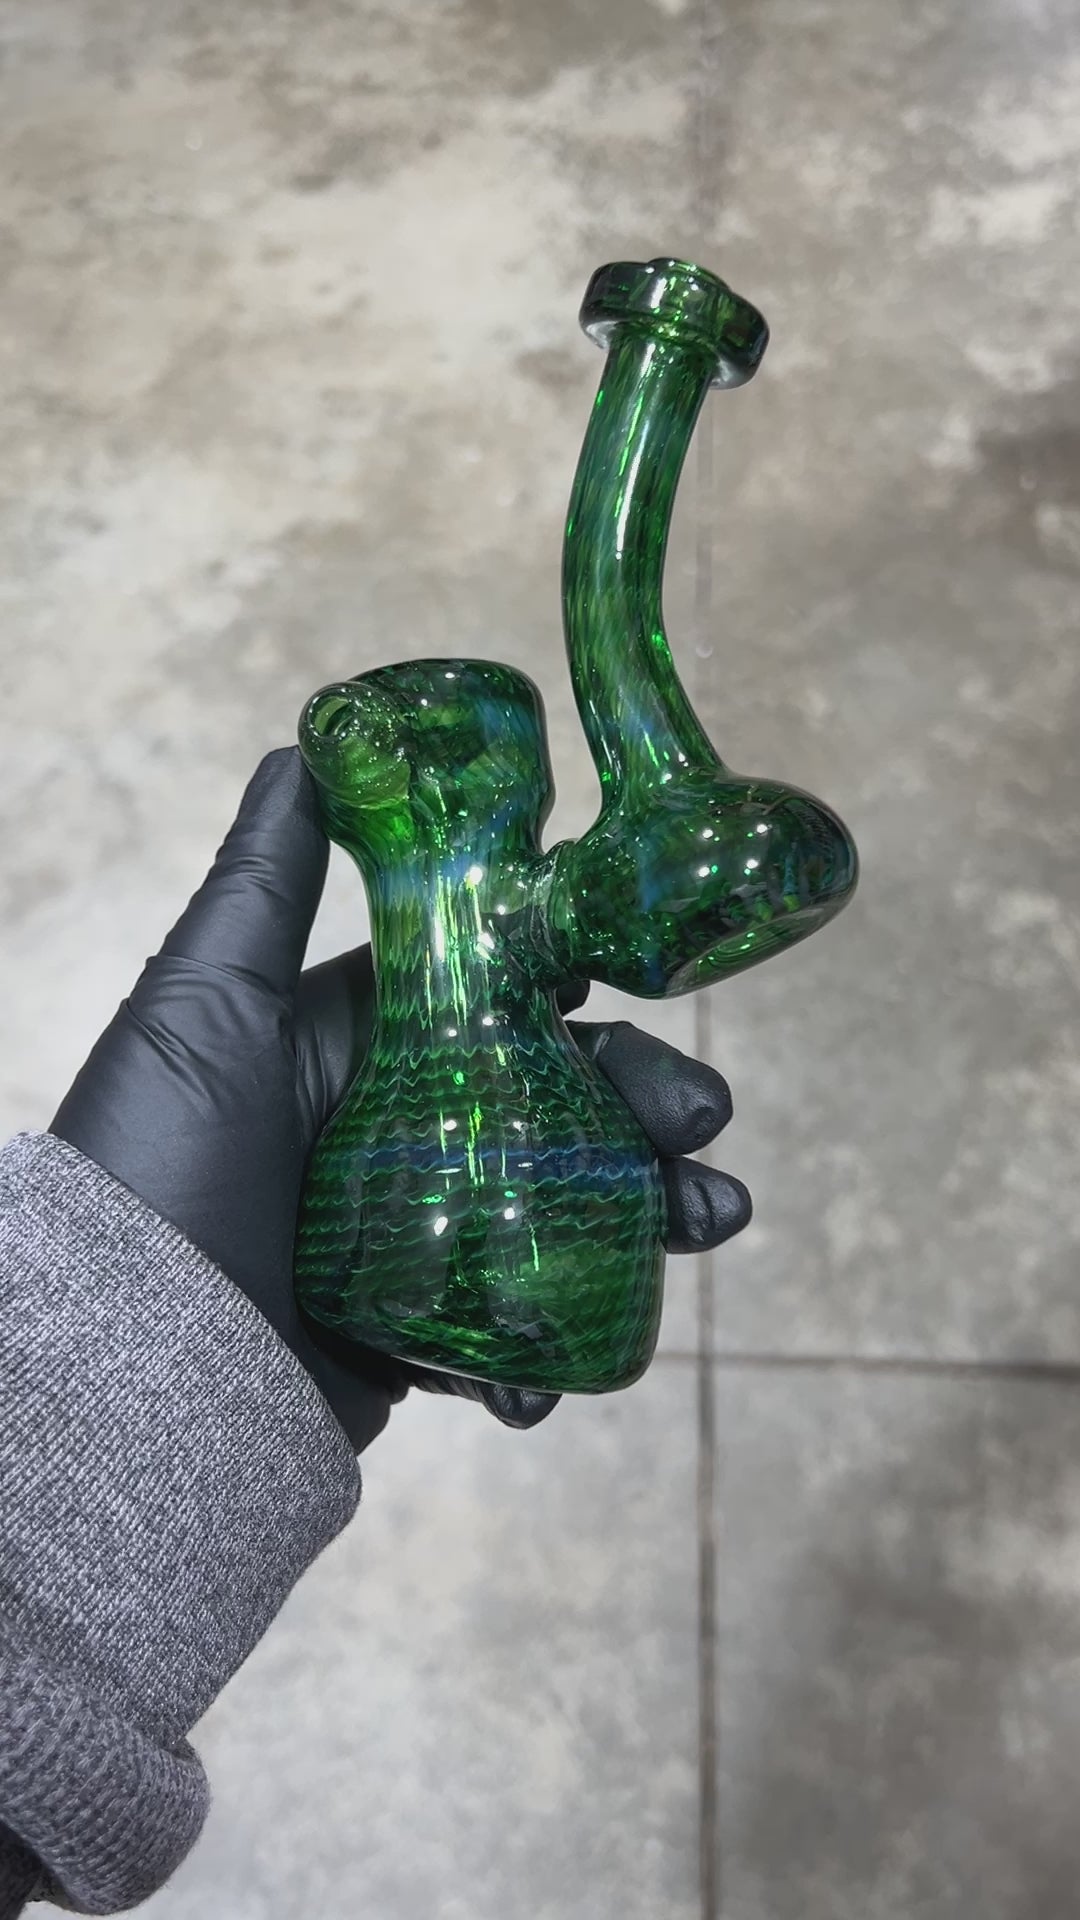 Forest Bubbler with Slyme Carb